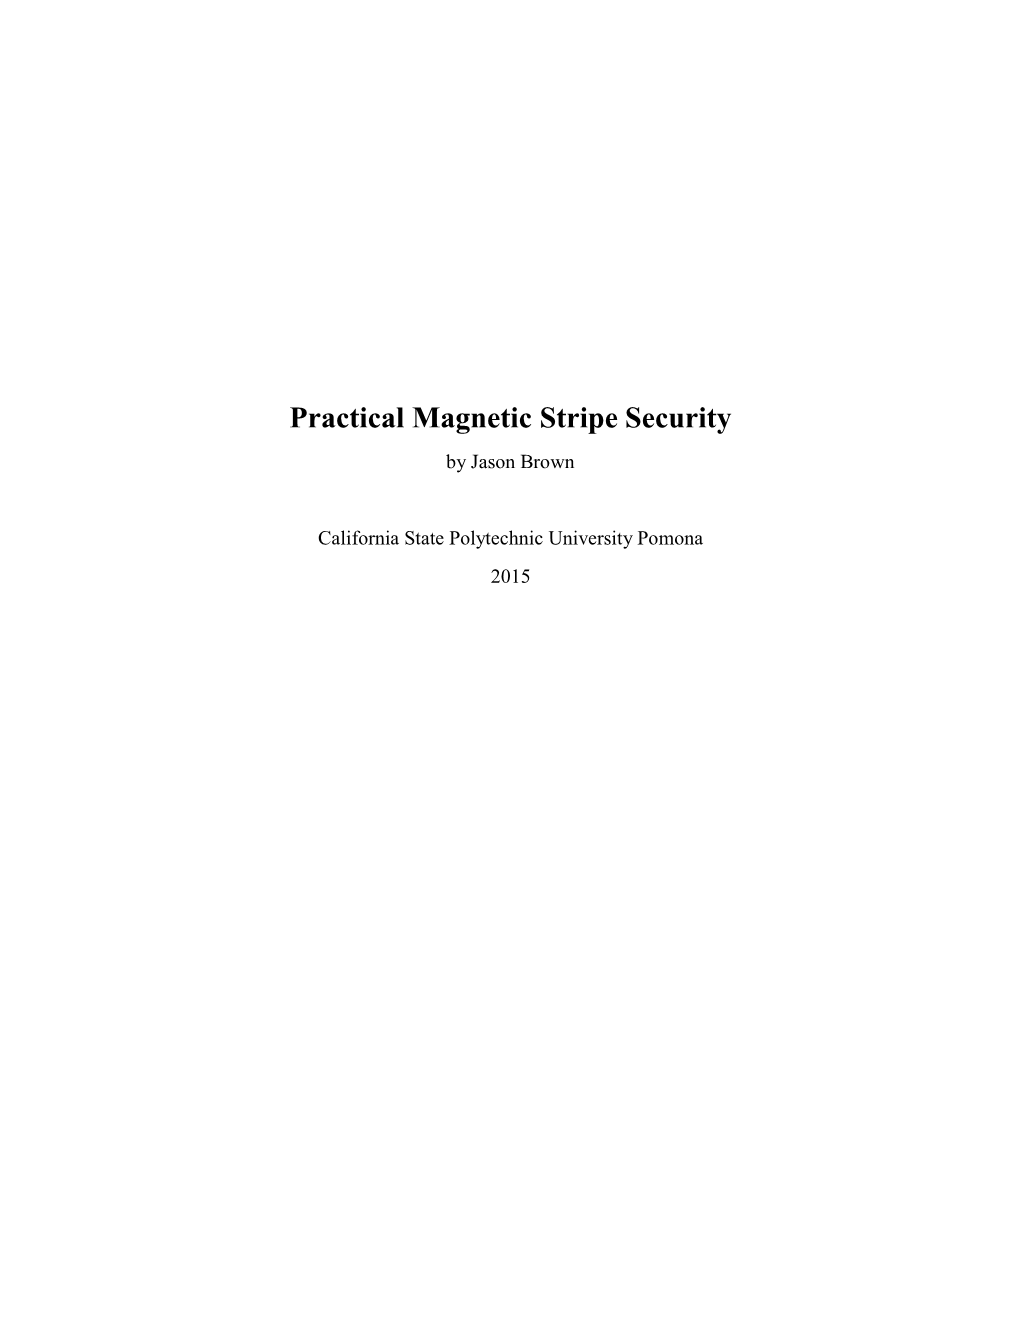 Practical Magnetic Stripe Security by Jason Brown